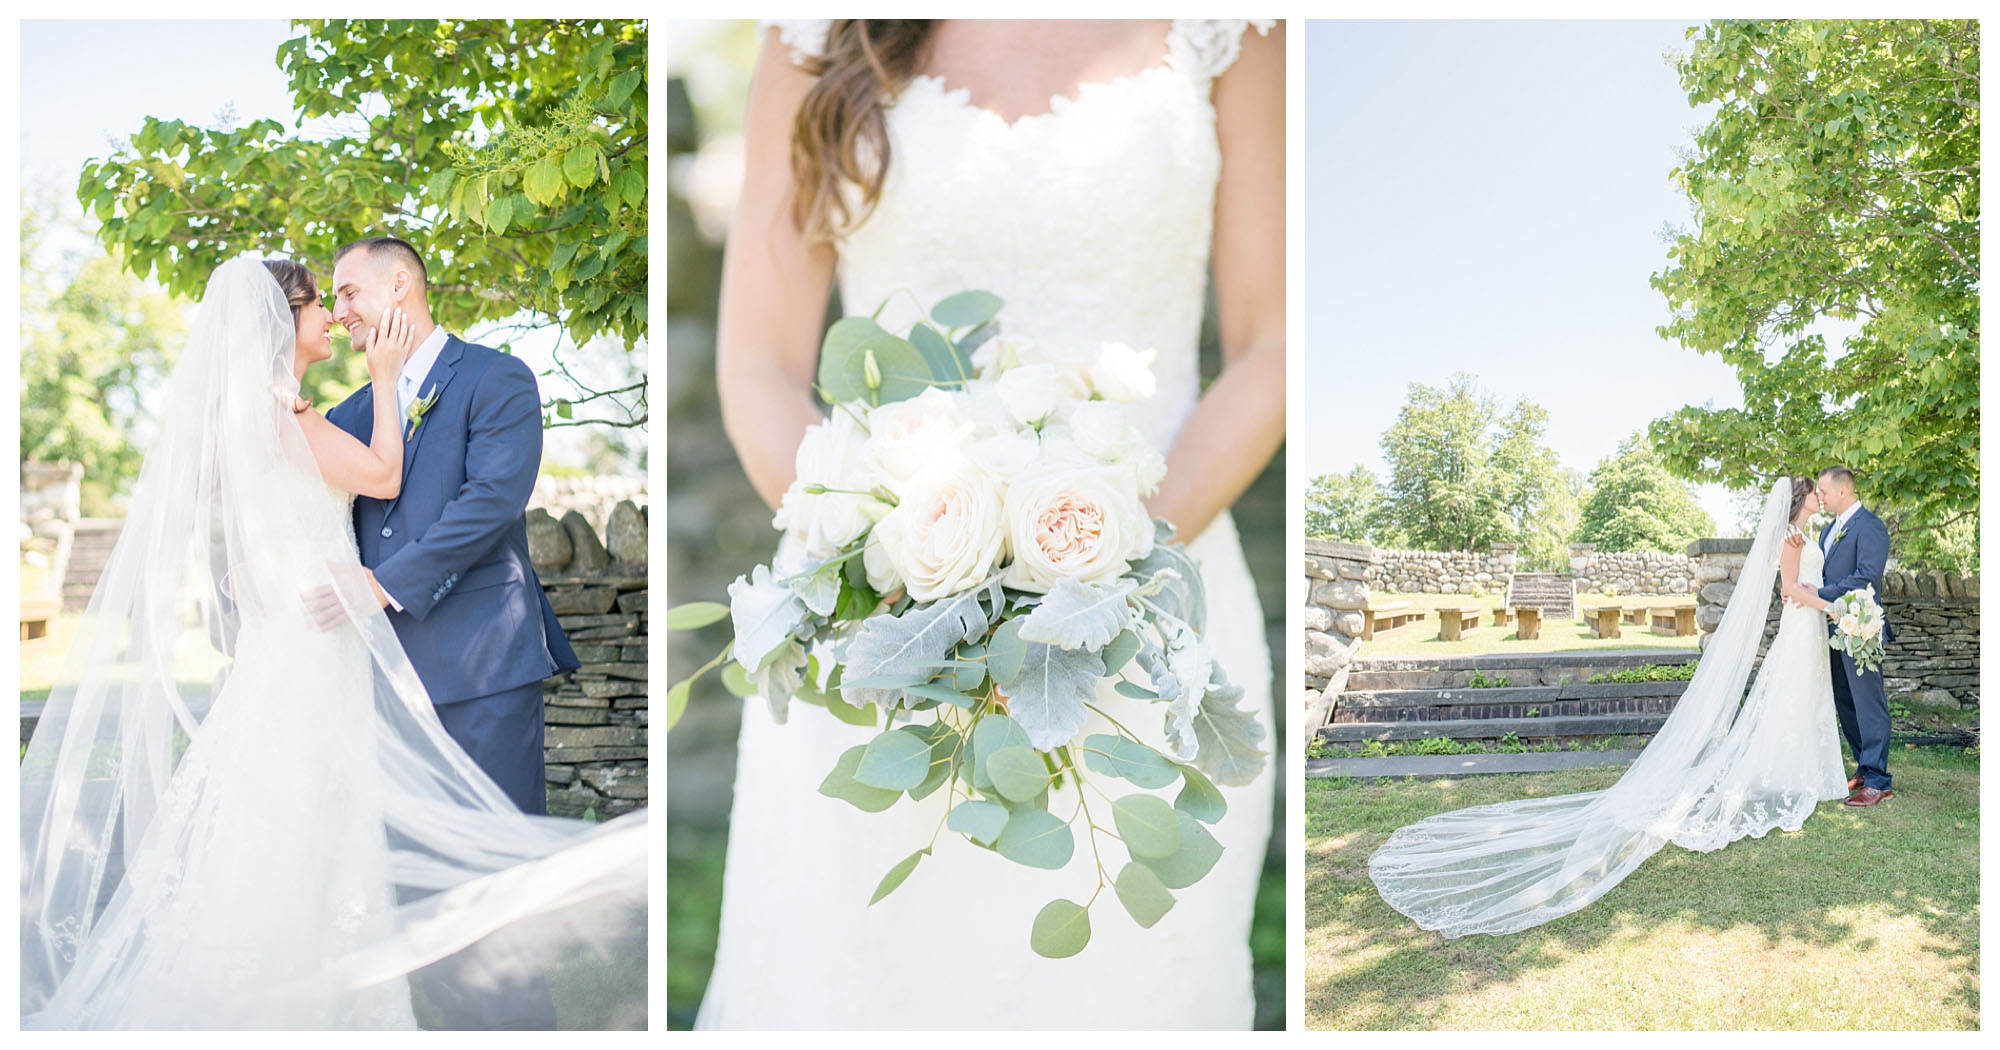 mountainview manor summer wedding at the ardmore mansion with an outdoor ceremony